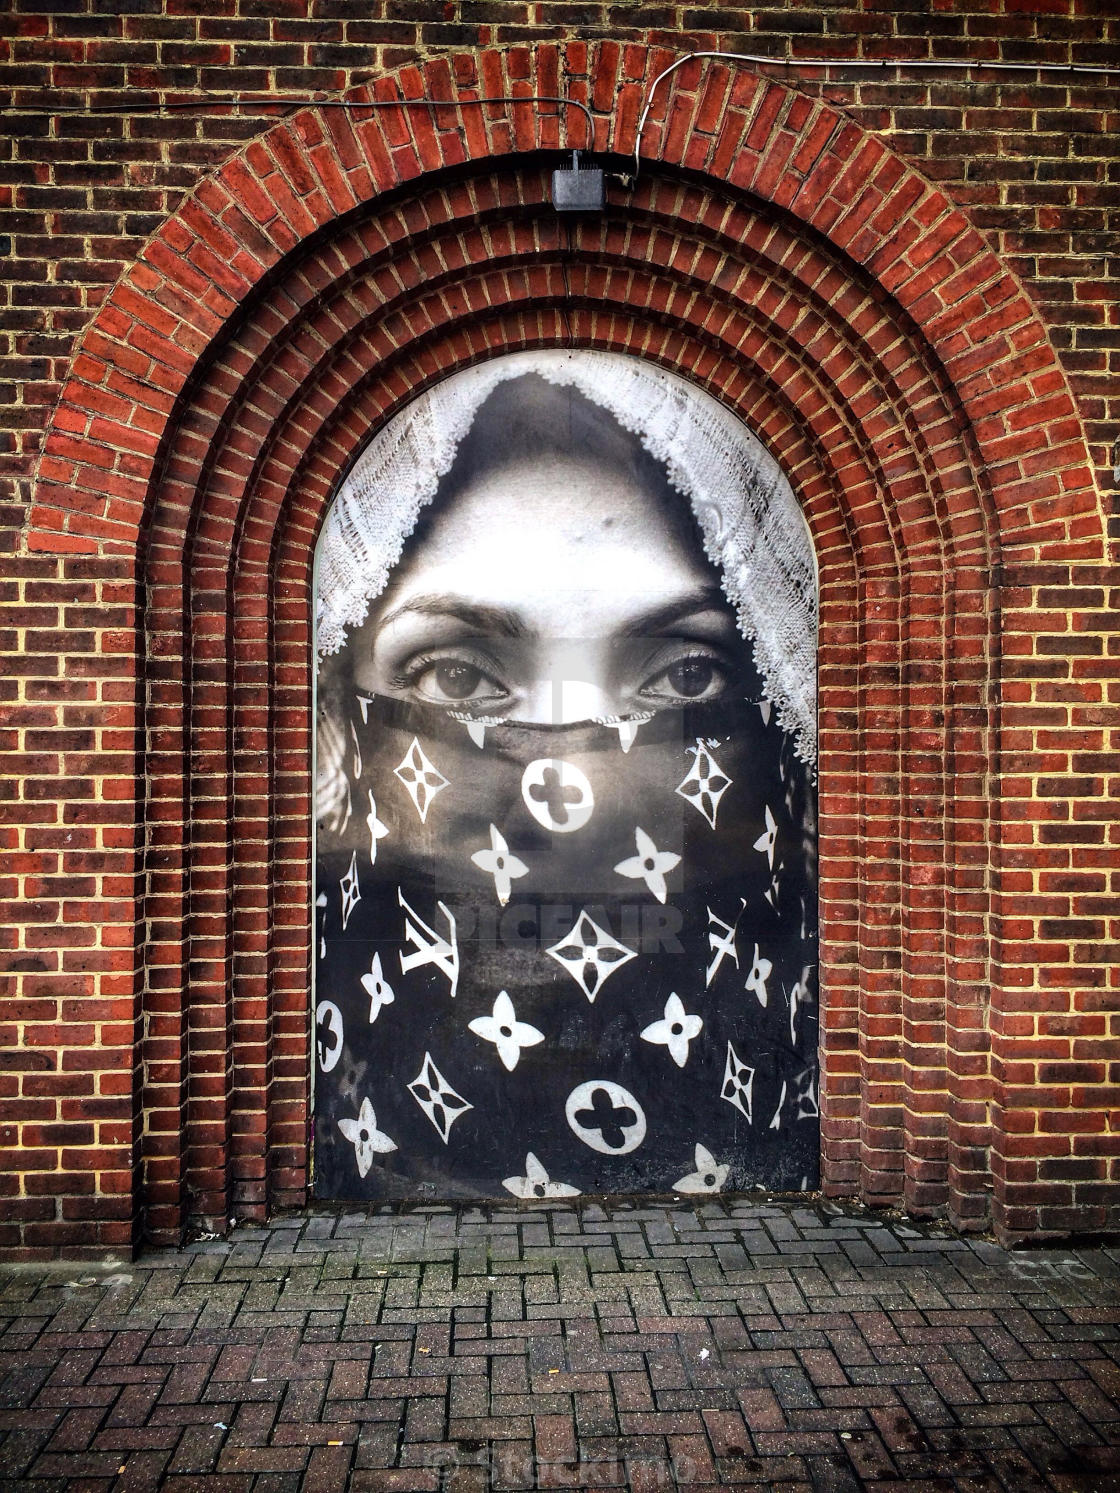 Street art installation by Moroccan born artist Hassan a woman wearing a Louis Vuitton niqab, in Old Street, Shoreditch, London, England. - License, download or print for £31.00 | | Picfair